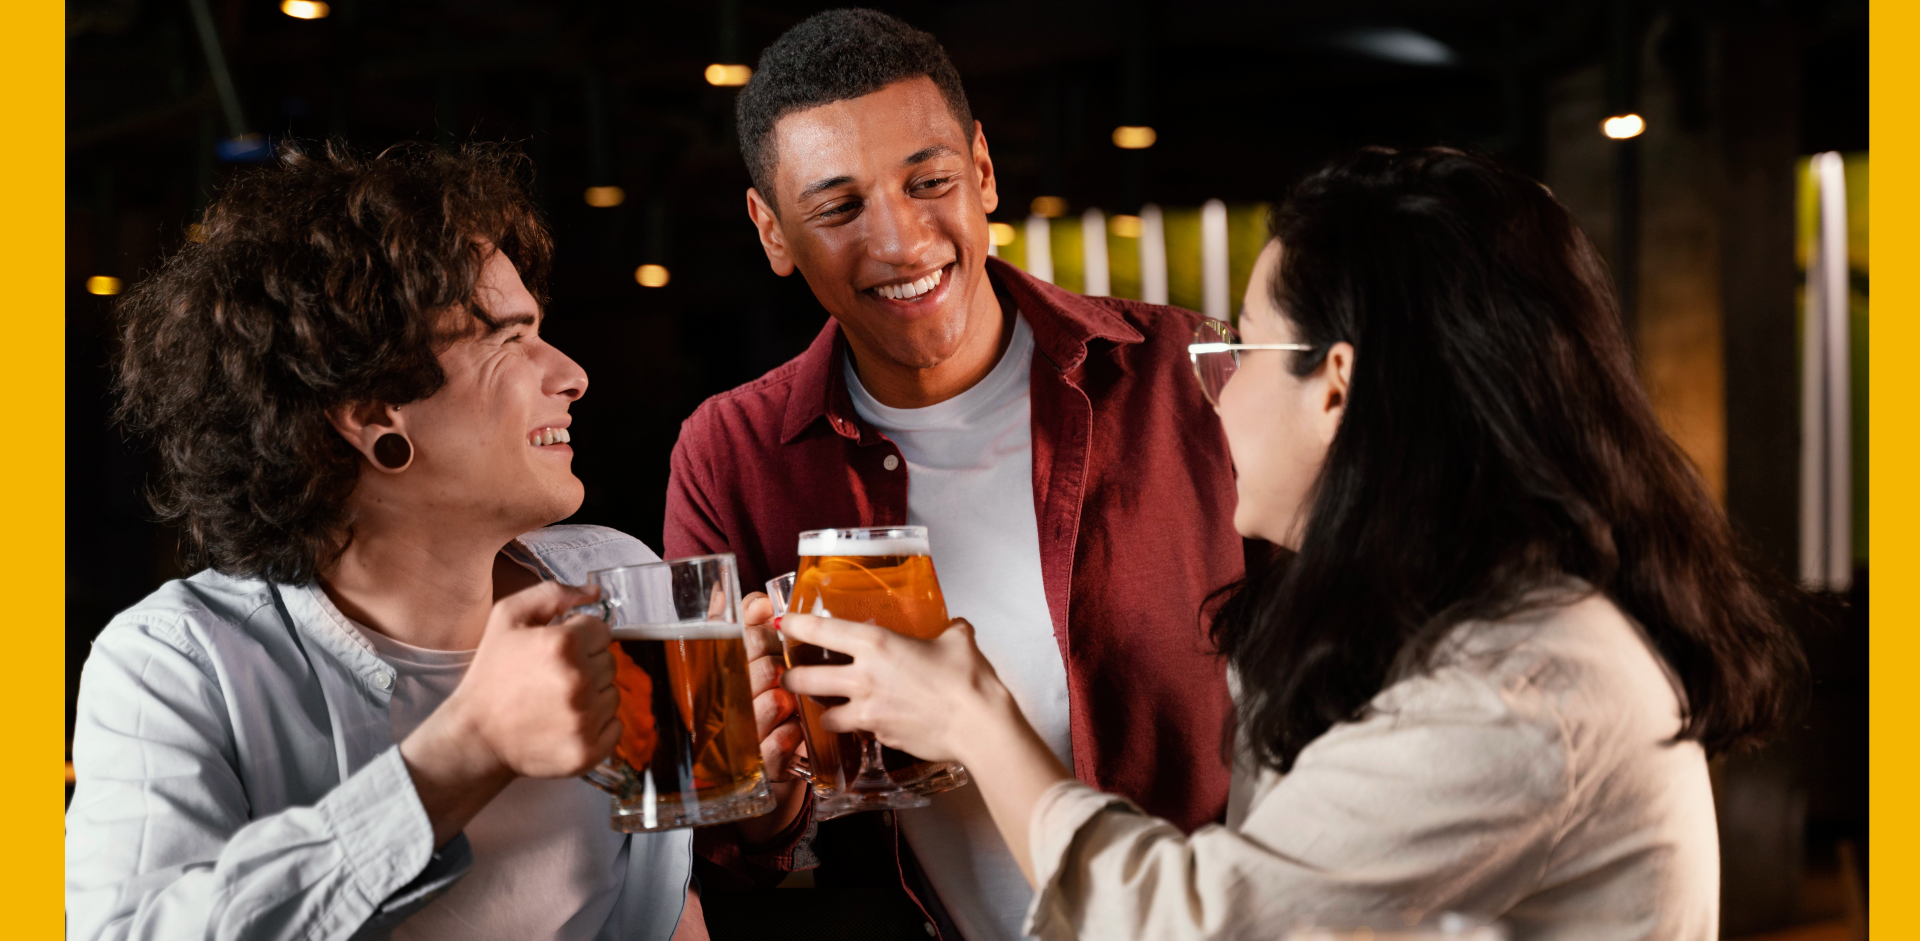 Three friends enjoying drinks together at a bar, smiling and holding beer mugs